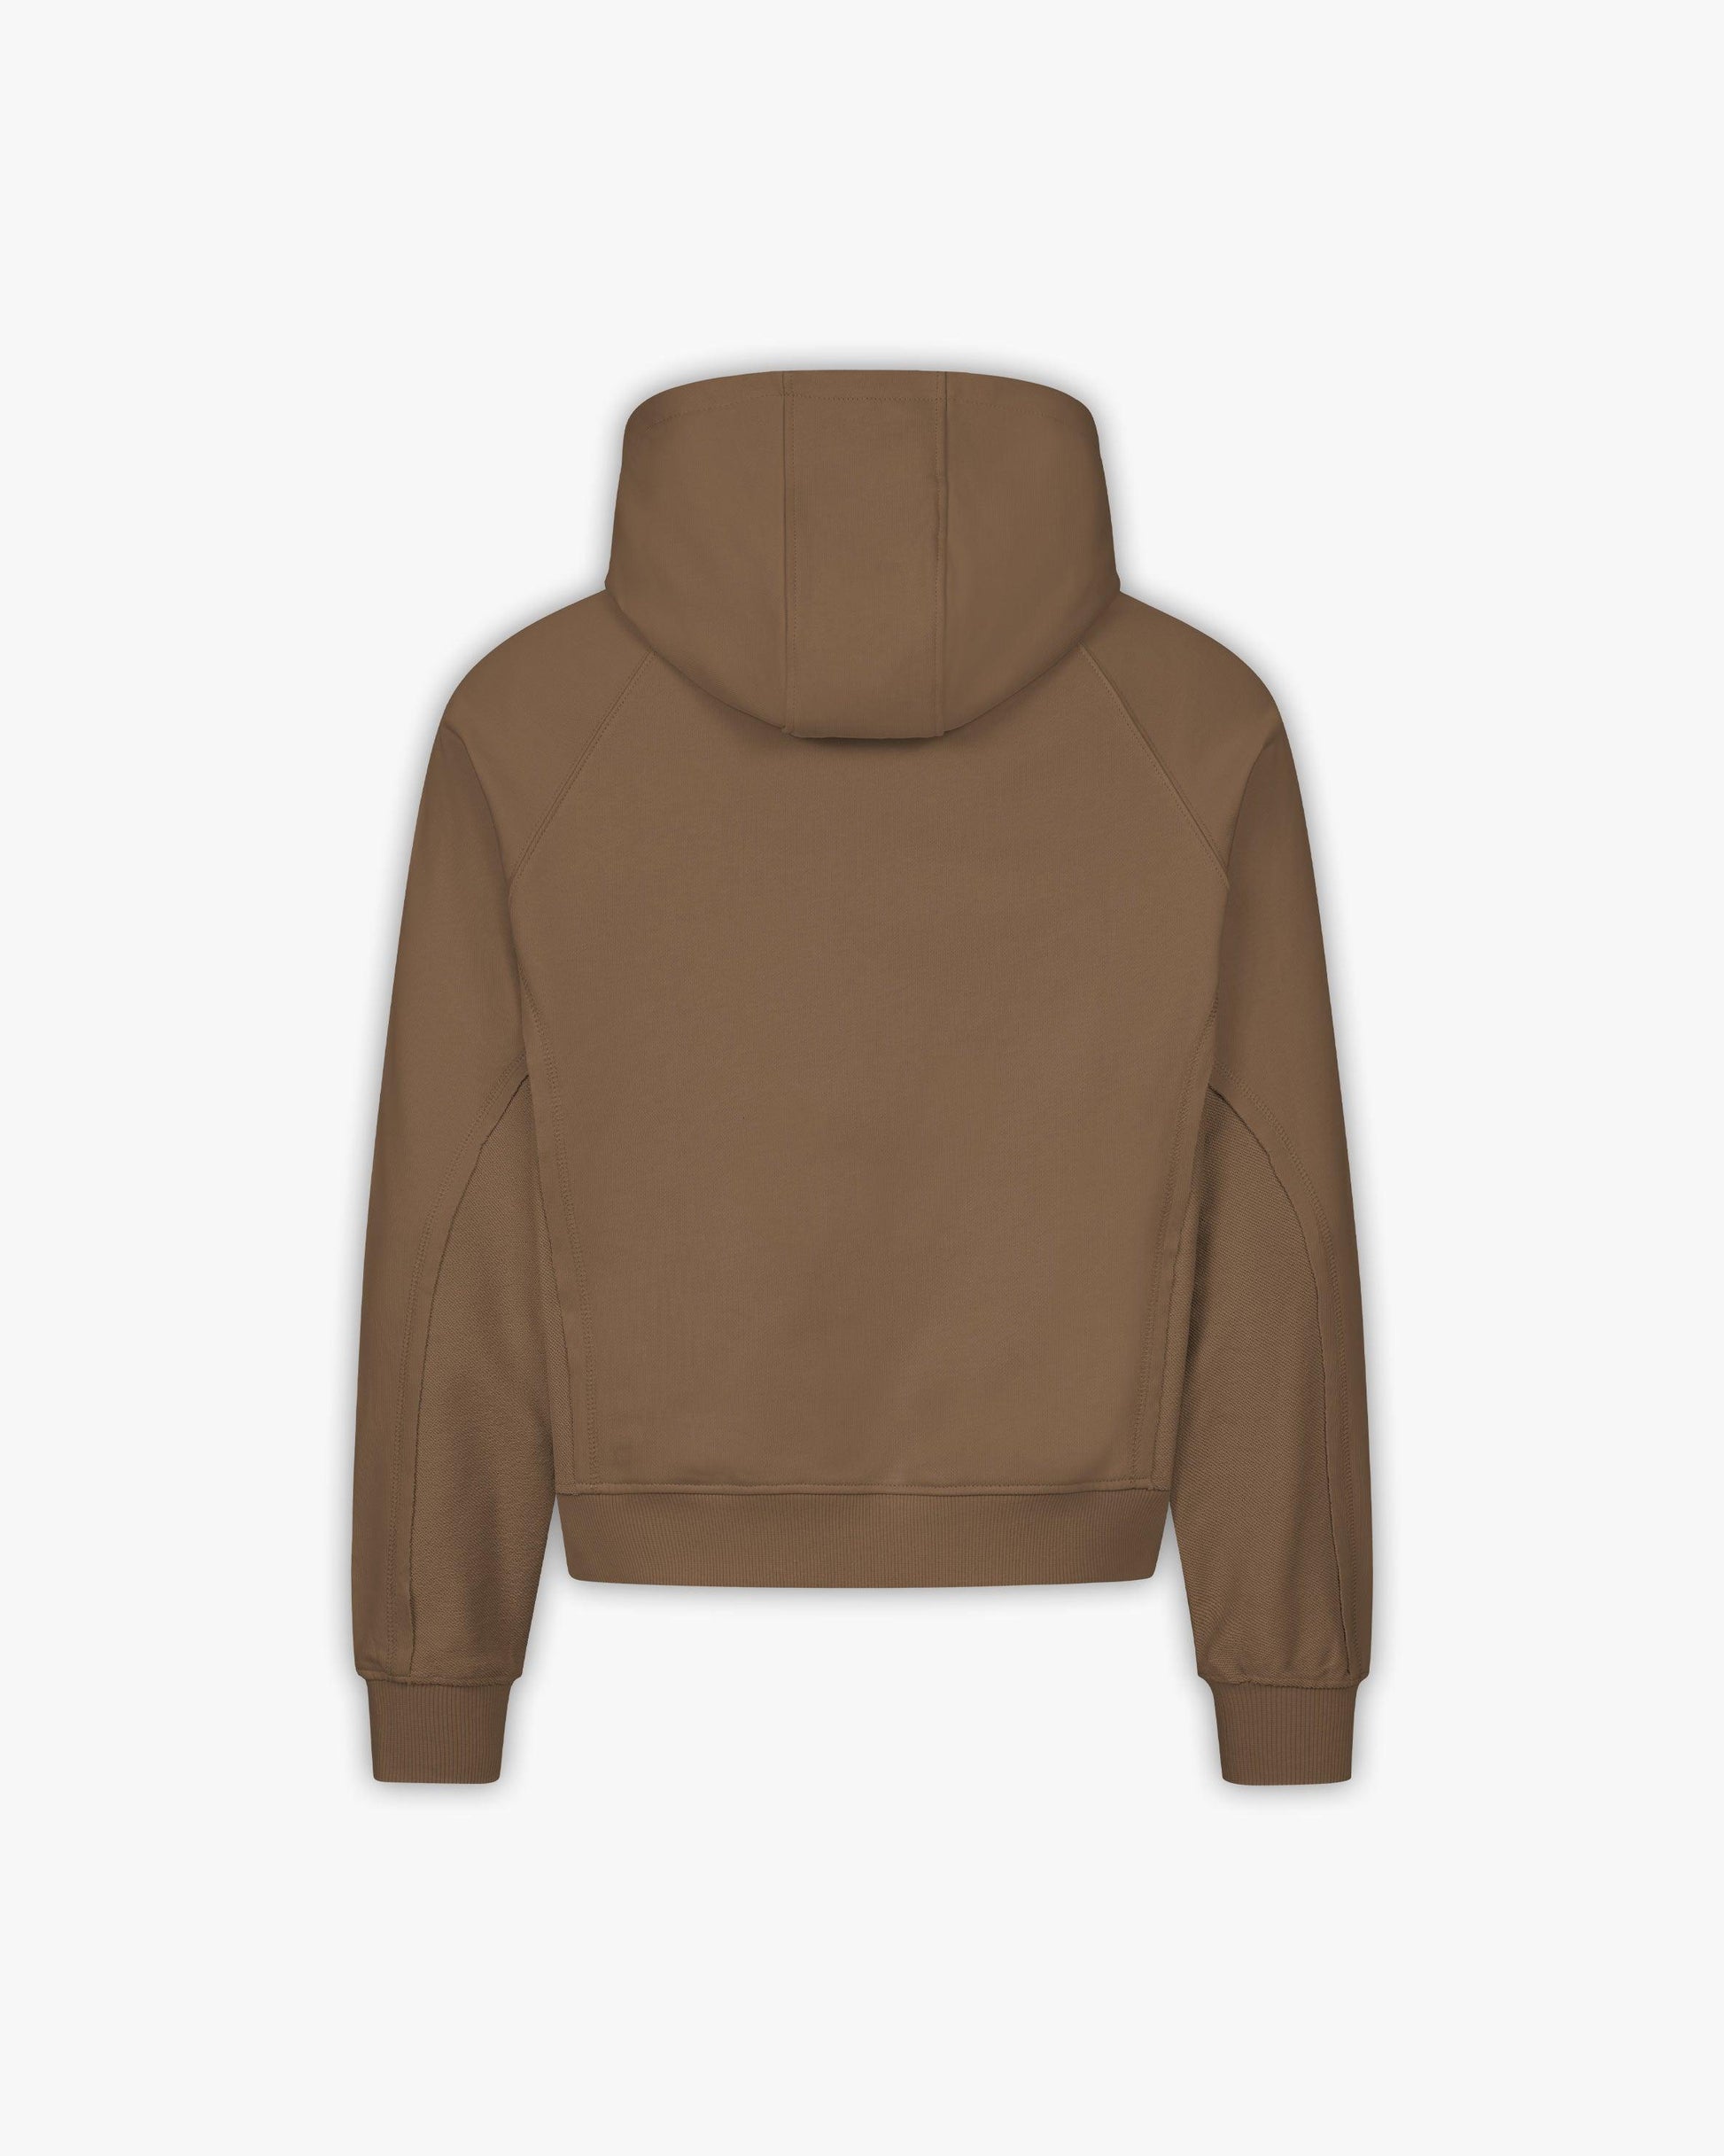 INSIDE OUT HOODIE CHOCOLATE BROWN - VICINITY